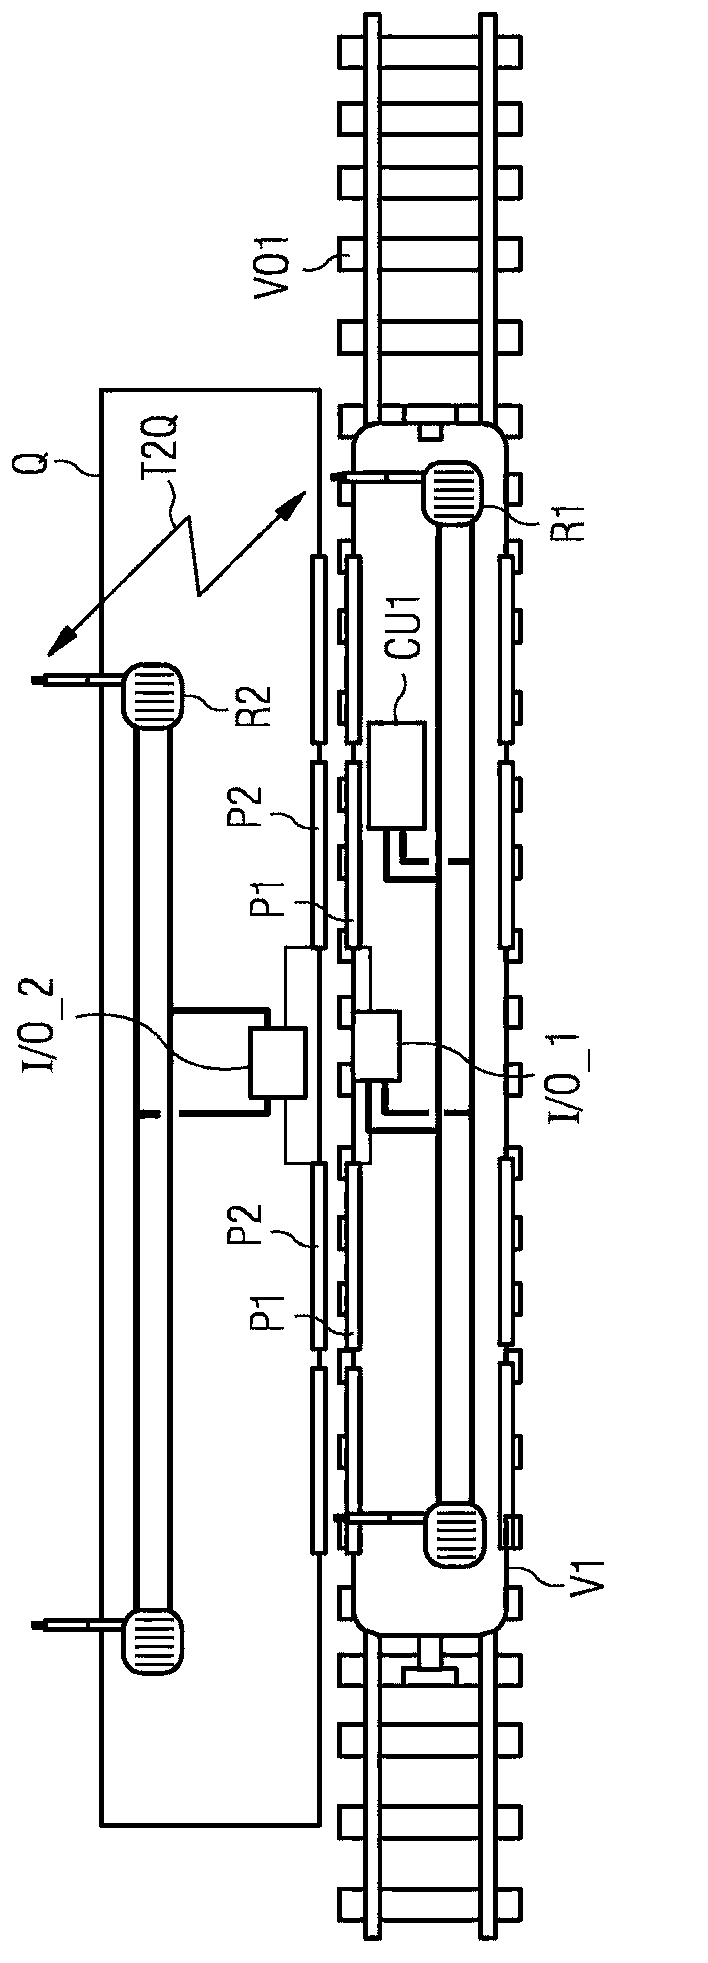 Method for communicating information between an on-board control unit and a public transport network